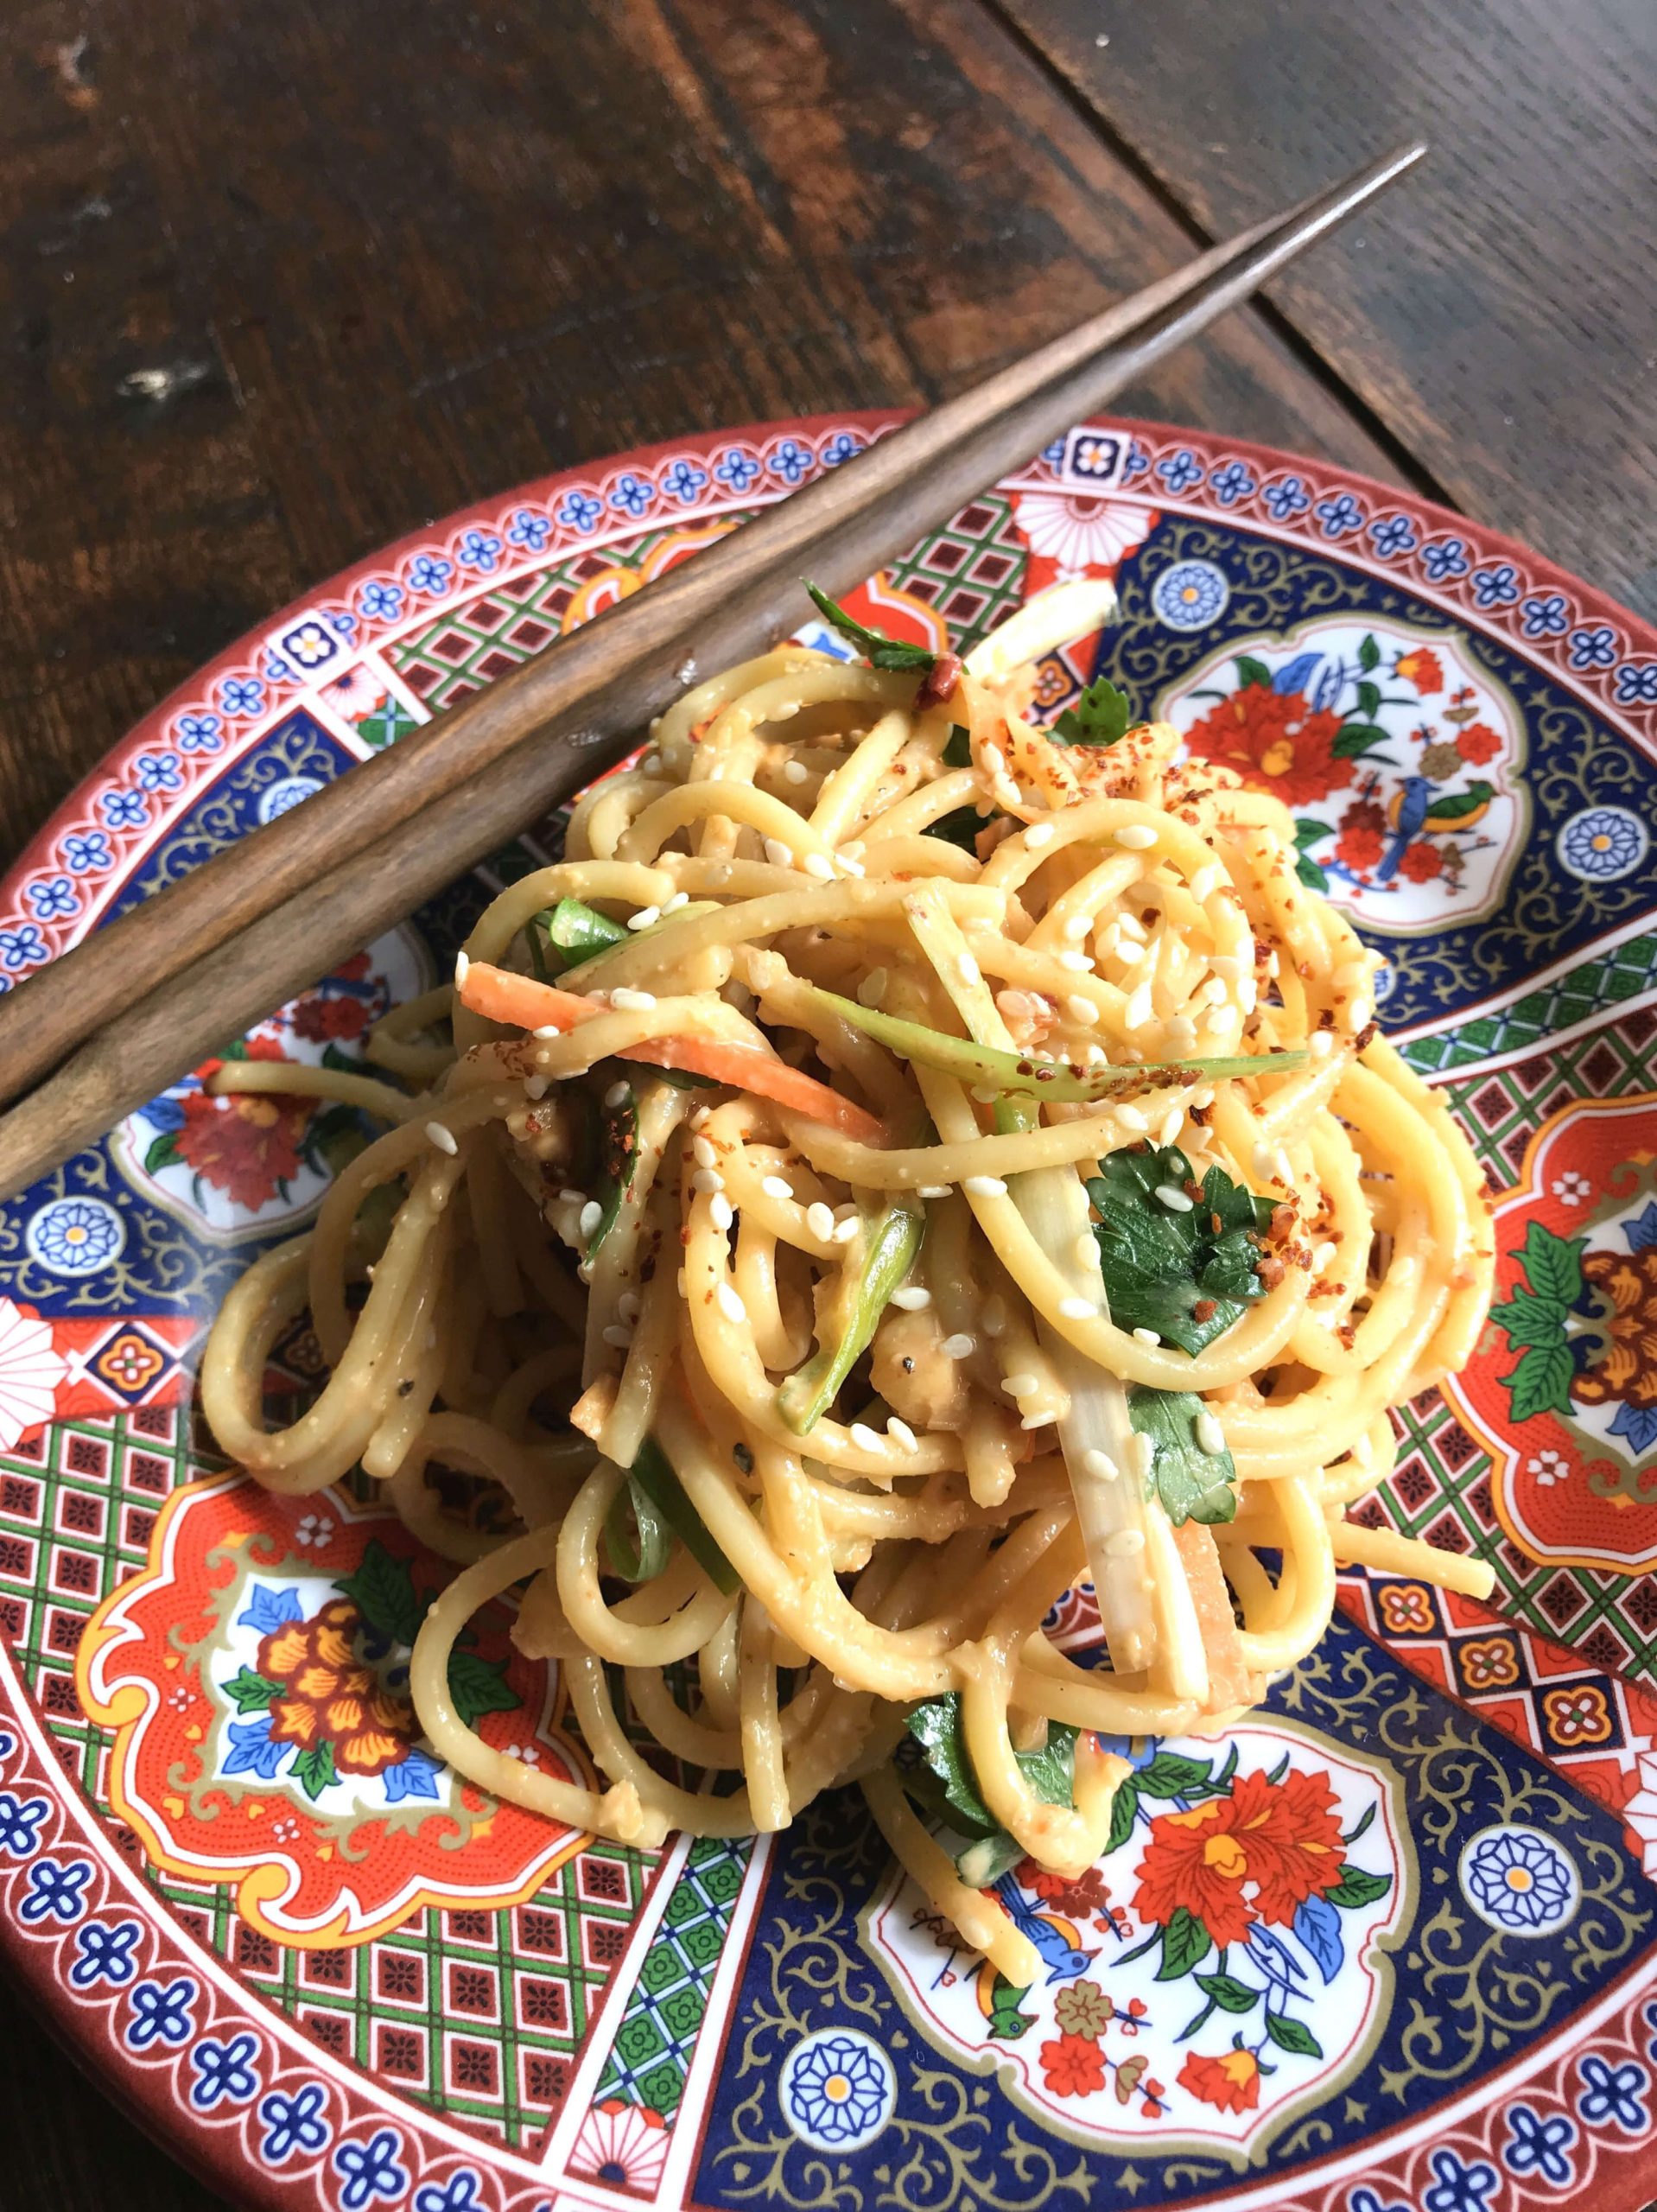 Cold Takeout-Style Noodles with Peanut Sauce